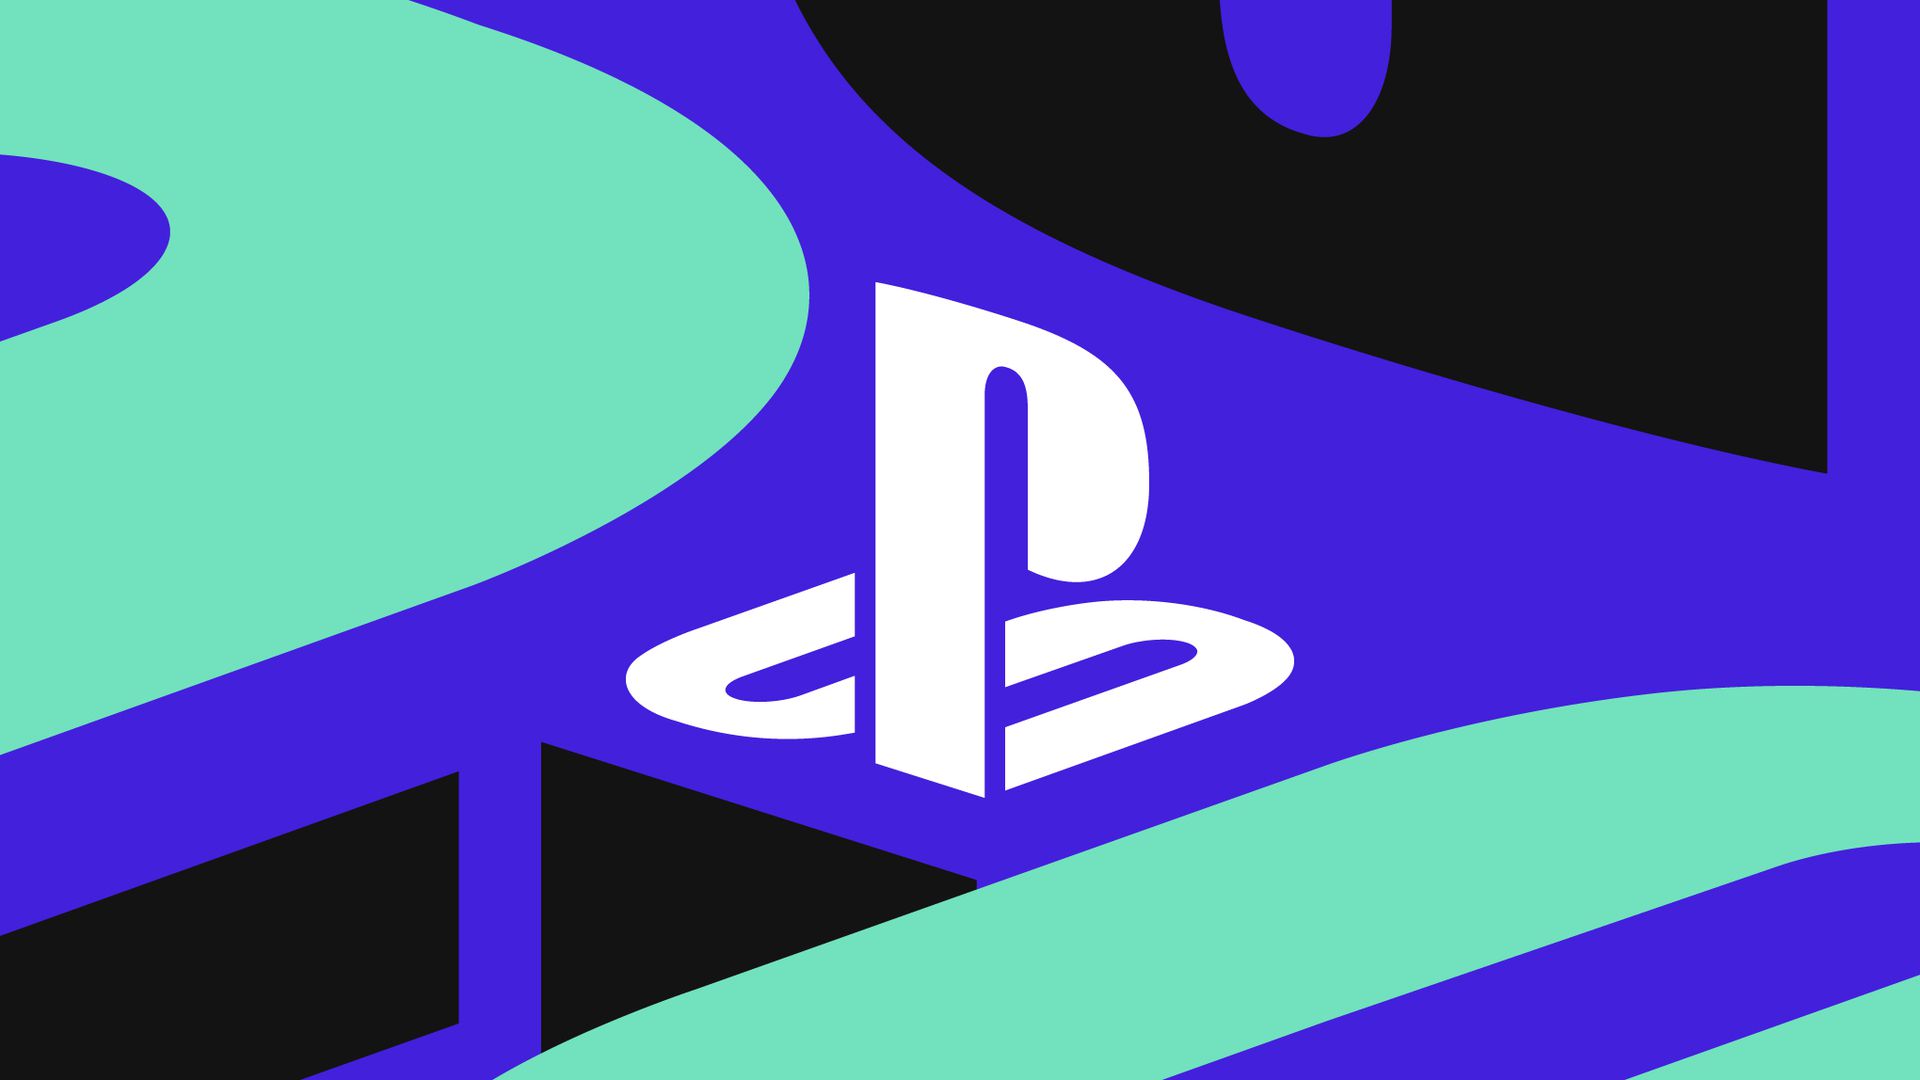 sony wants 60fps ps5 pro ‘enhanced’ games, but it’s happy to settle for less